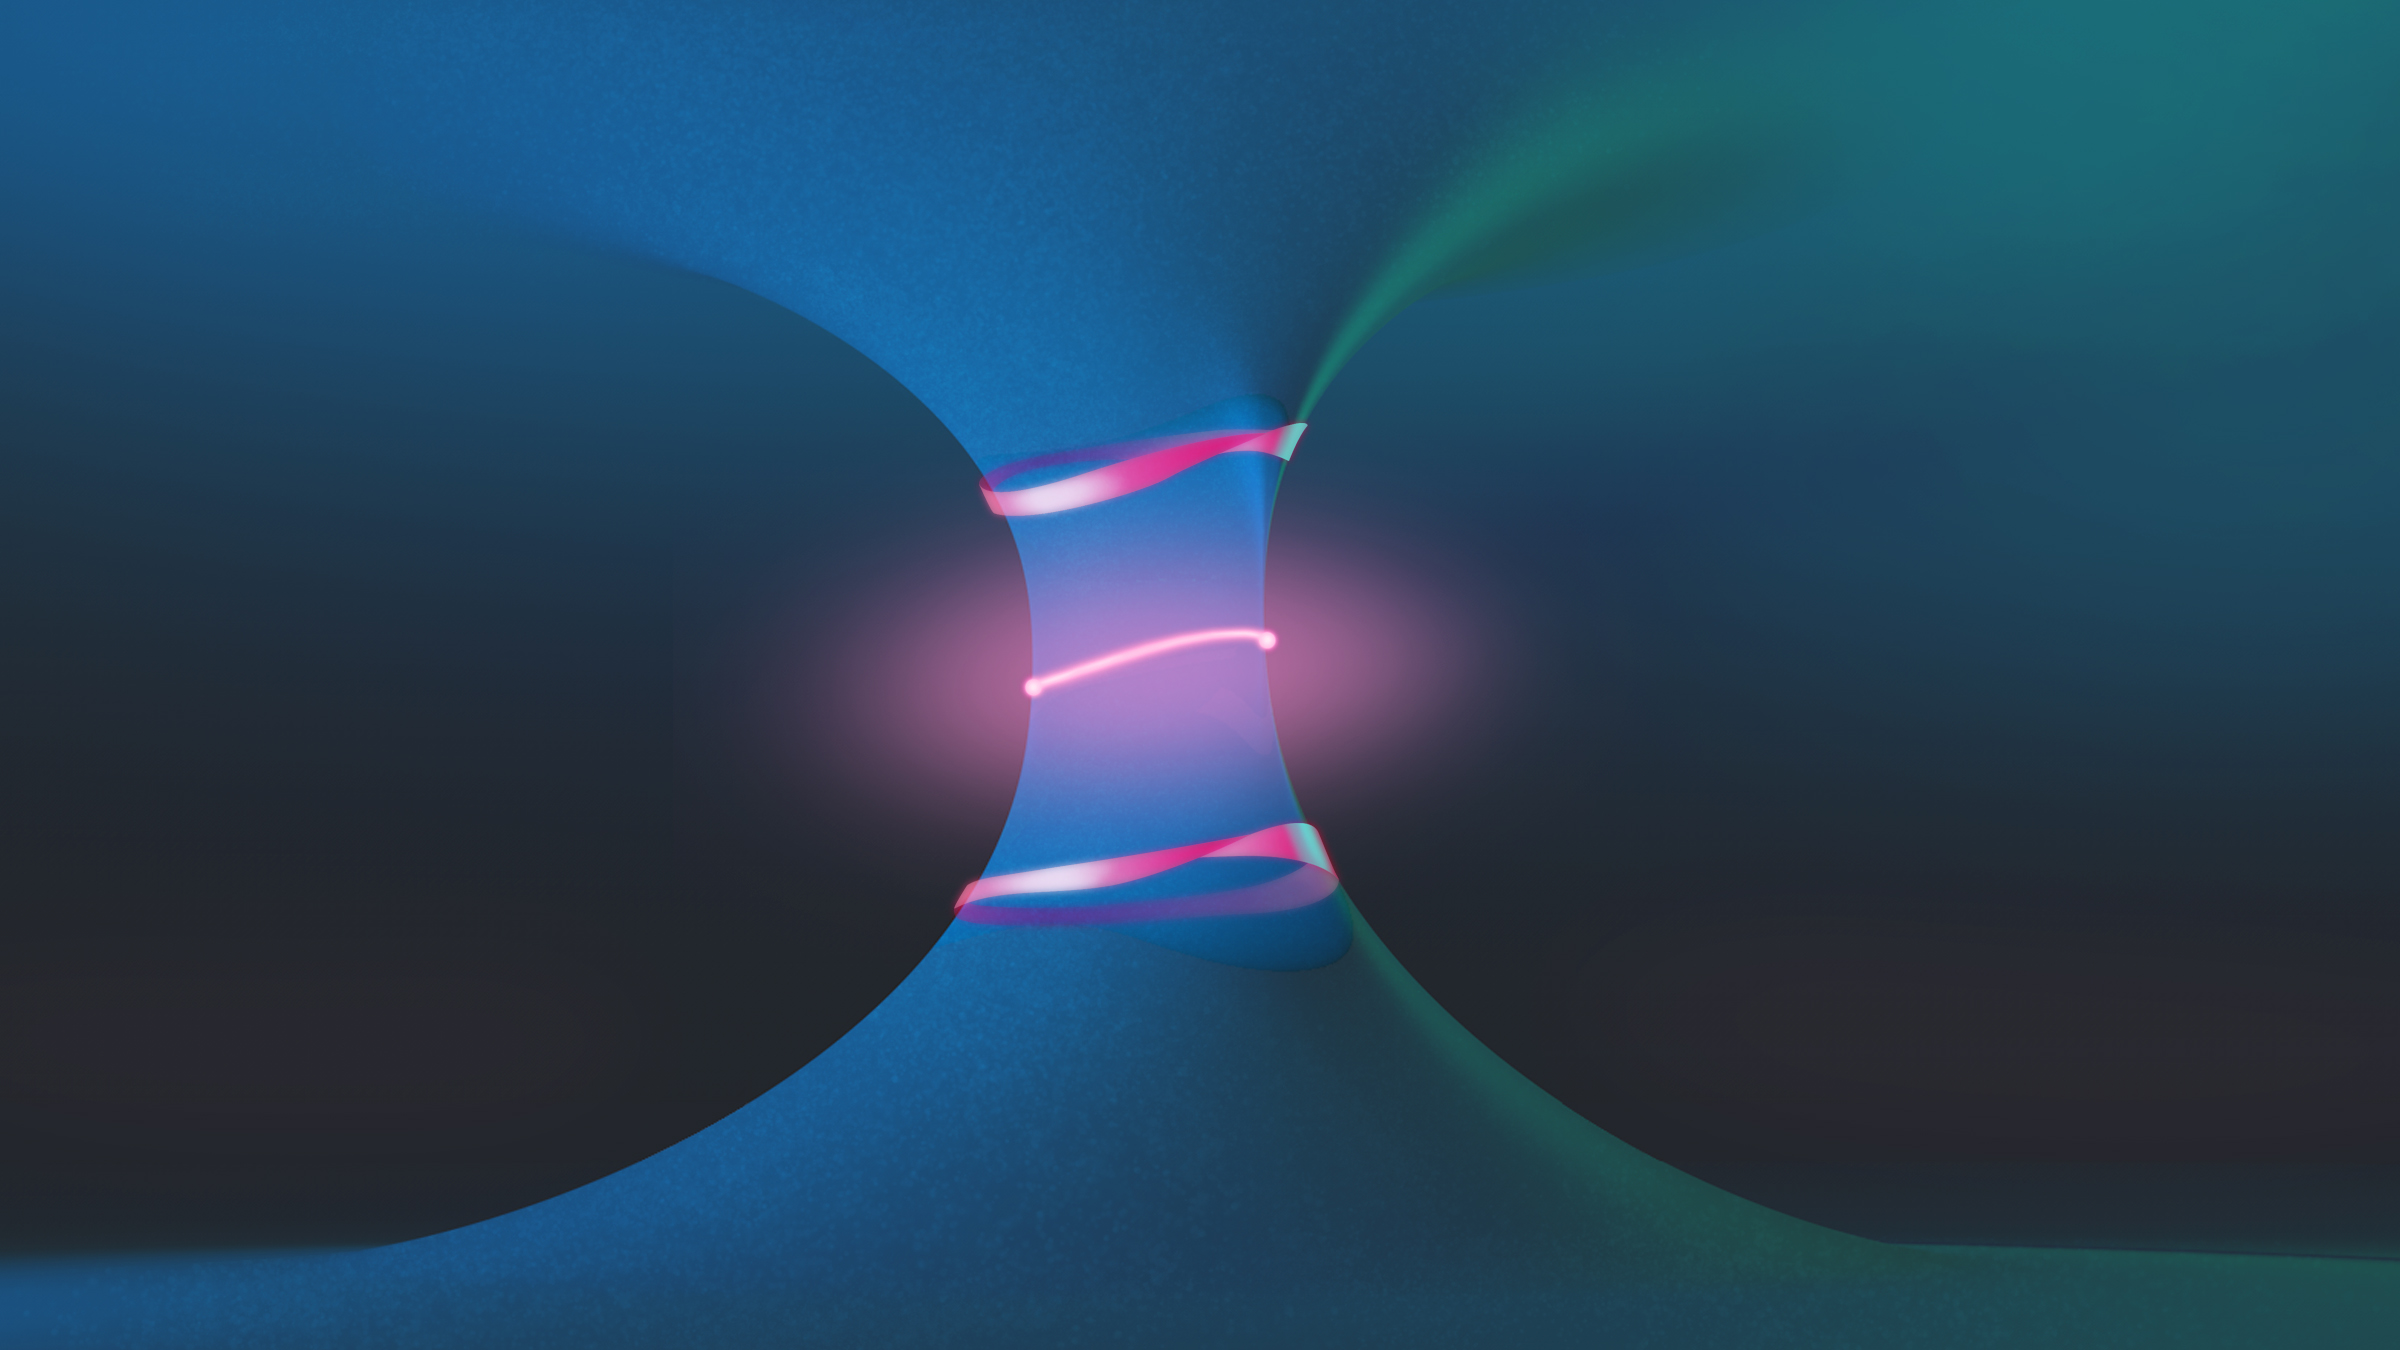 New exotic phenomena seen in photonic crystals